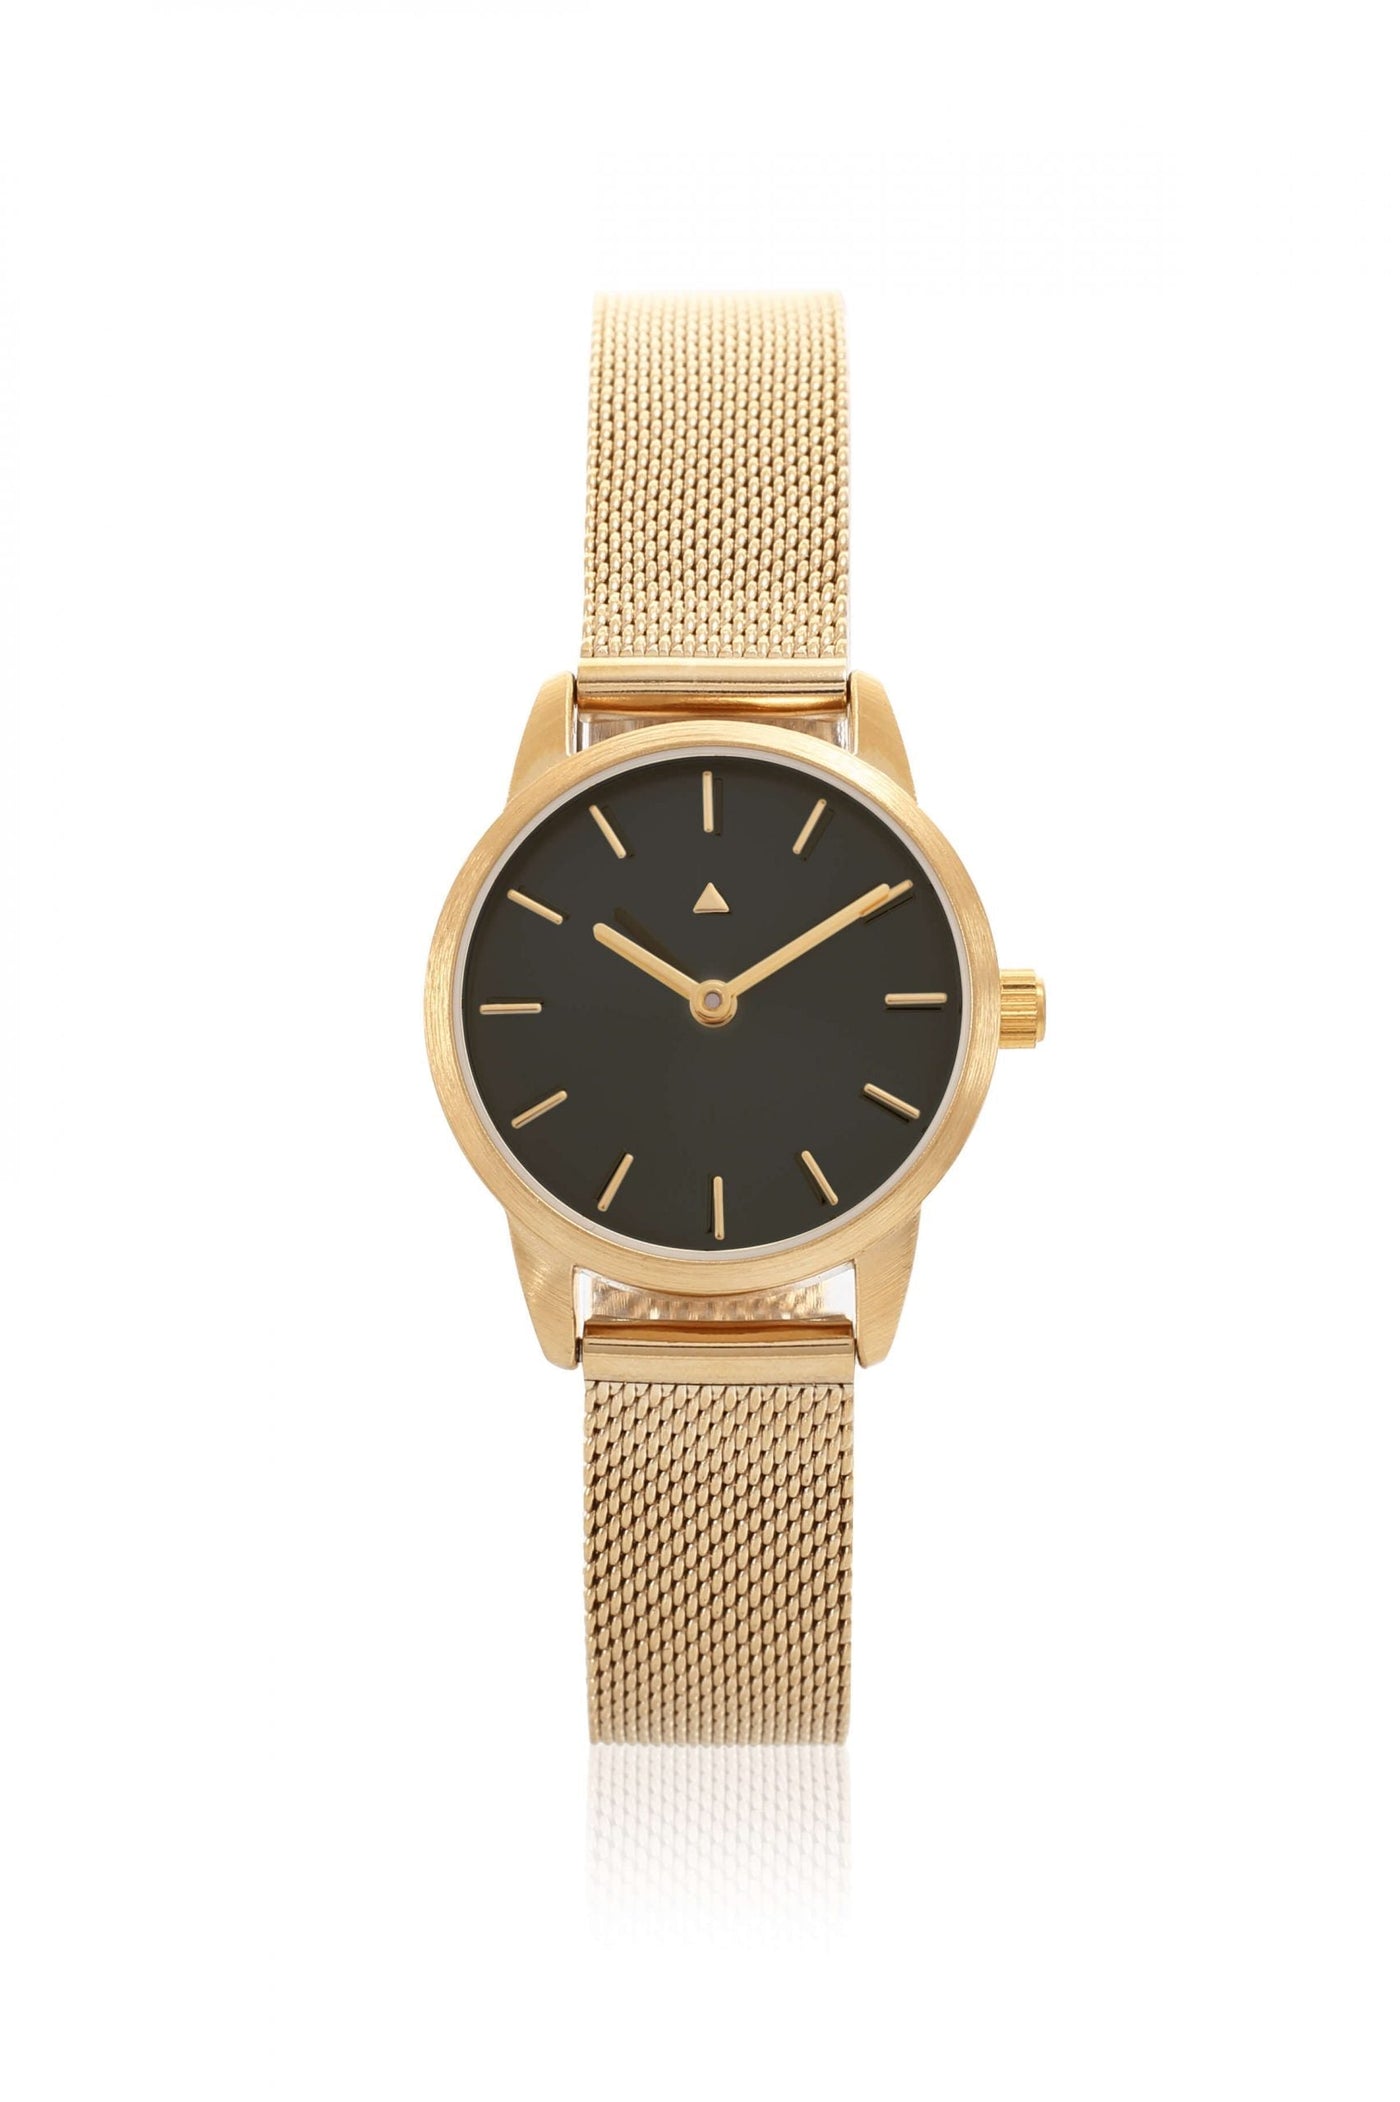 25 mm watch in black with a golden mesh strap